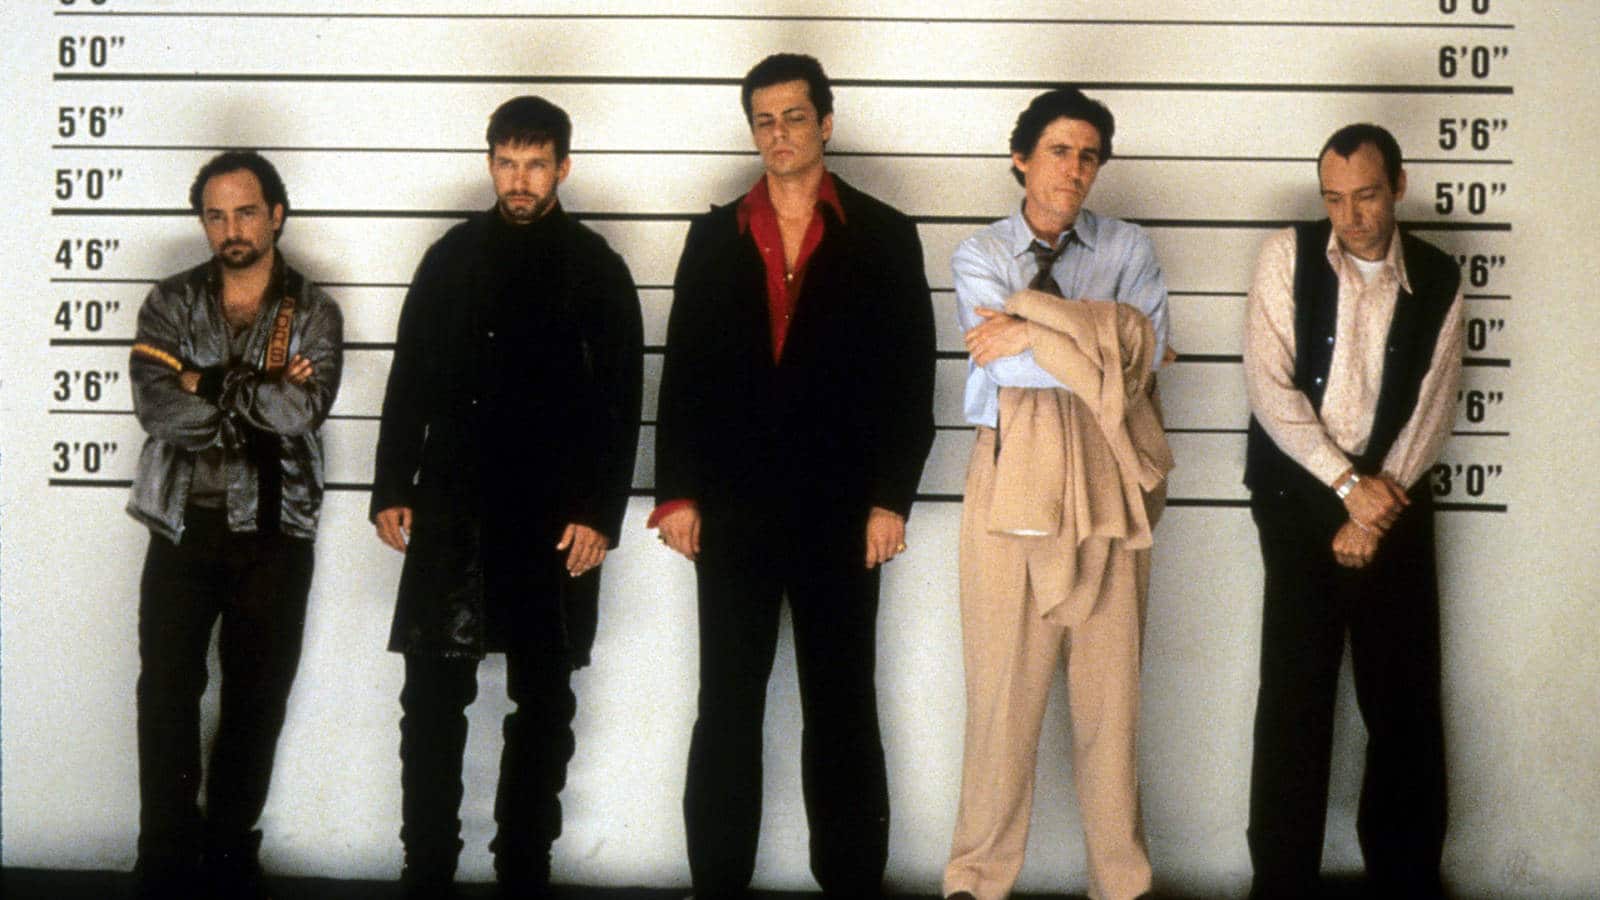 The Usual Suspects Line-up Scene